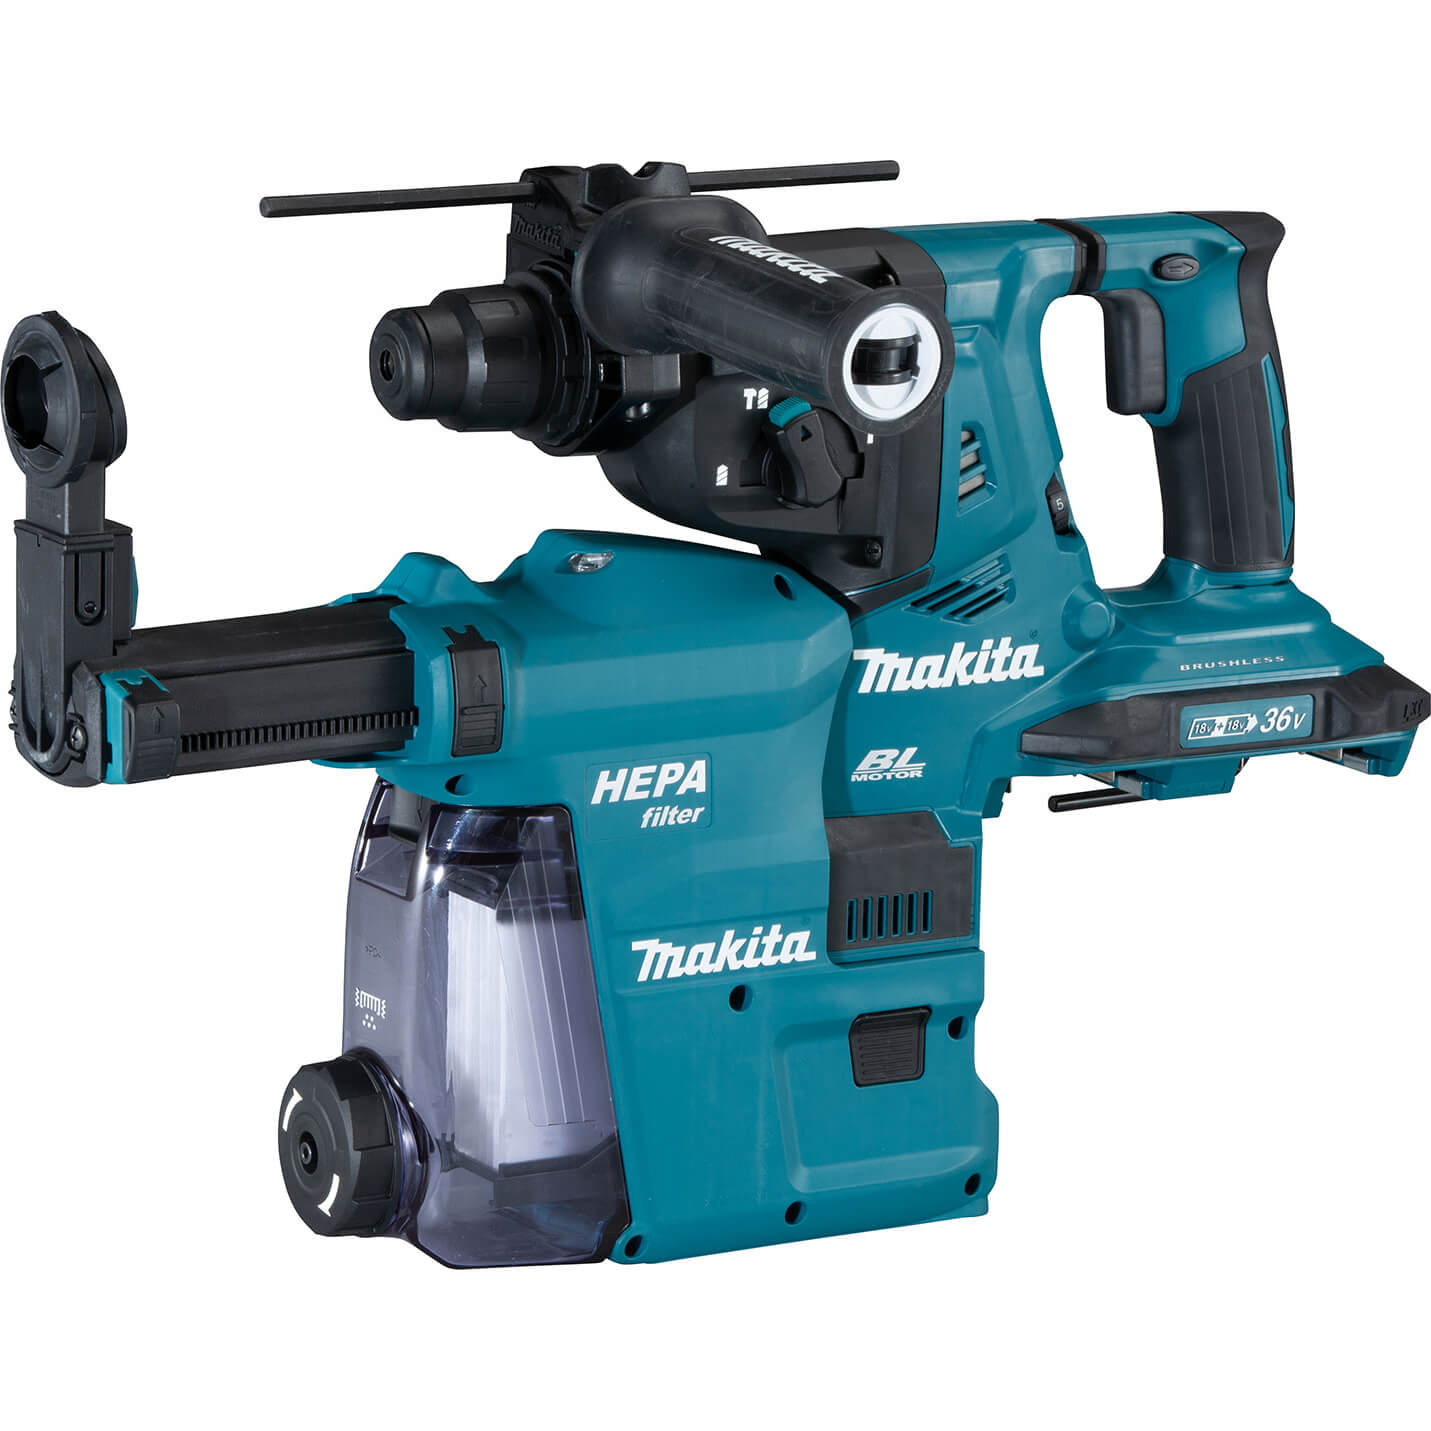 Image of Makita DHR280 Twin 18v LXT Cordless Brushless SDS Hammer Drill No Batteries No Charger Case & Accessories